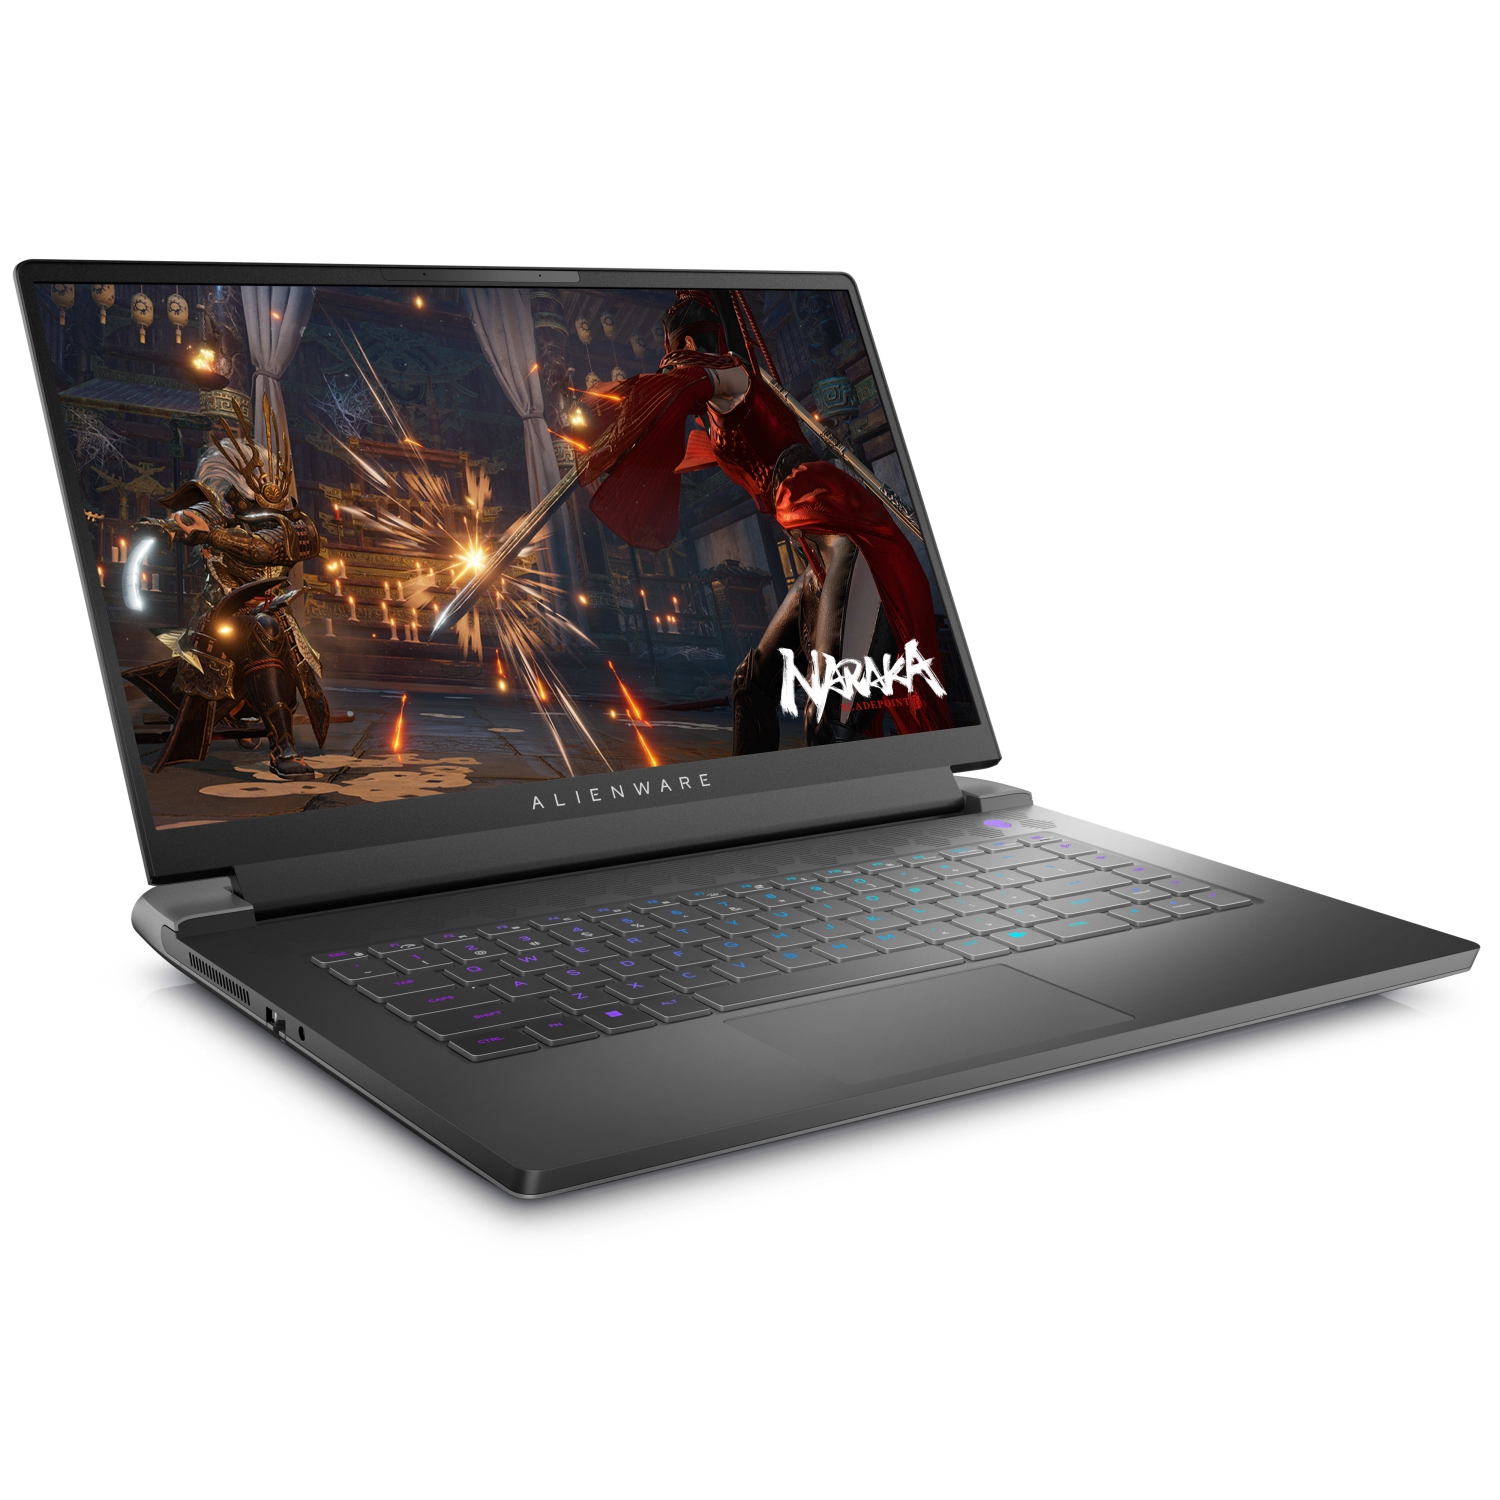 Refurbished (Excellent) – Dell Alienware m15 R7 Gaming Laptop (2022) | 15.6" FHD | Core i7 - 1TB SSD - 16GB RAM - 3080 Ti | 14 Cores @ 4.7 GHz - 12th Gen CPU - 12GB GDDR6X